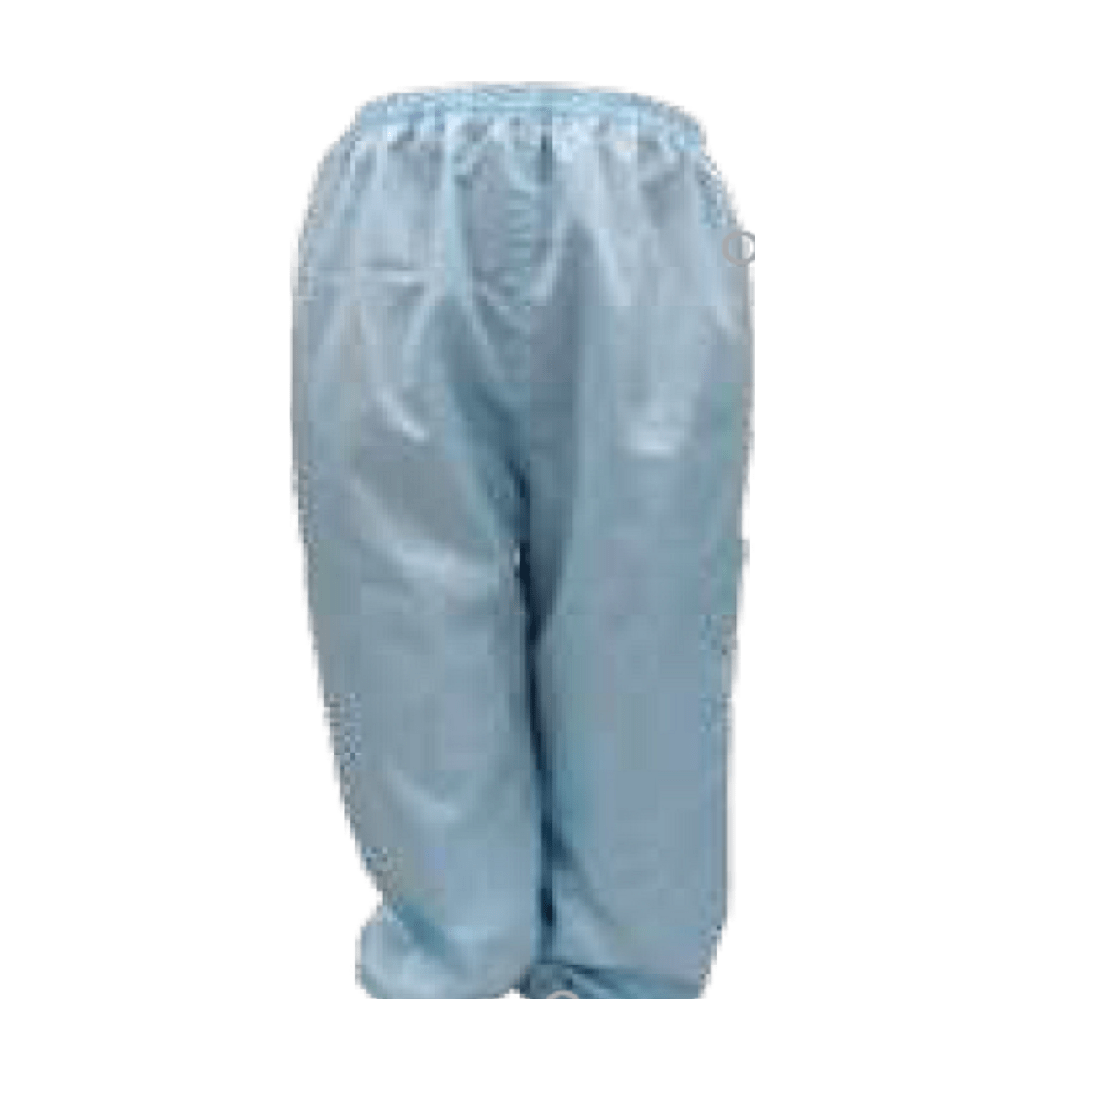 Safetyware Cleanware™ Antistatic Trouser